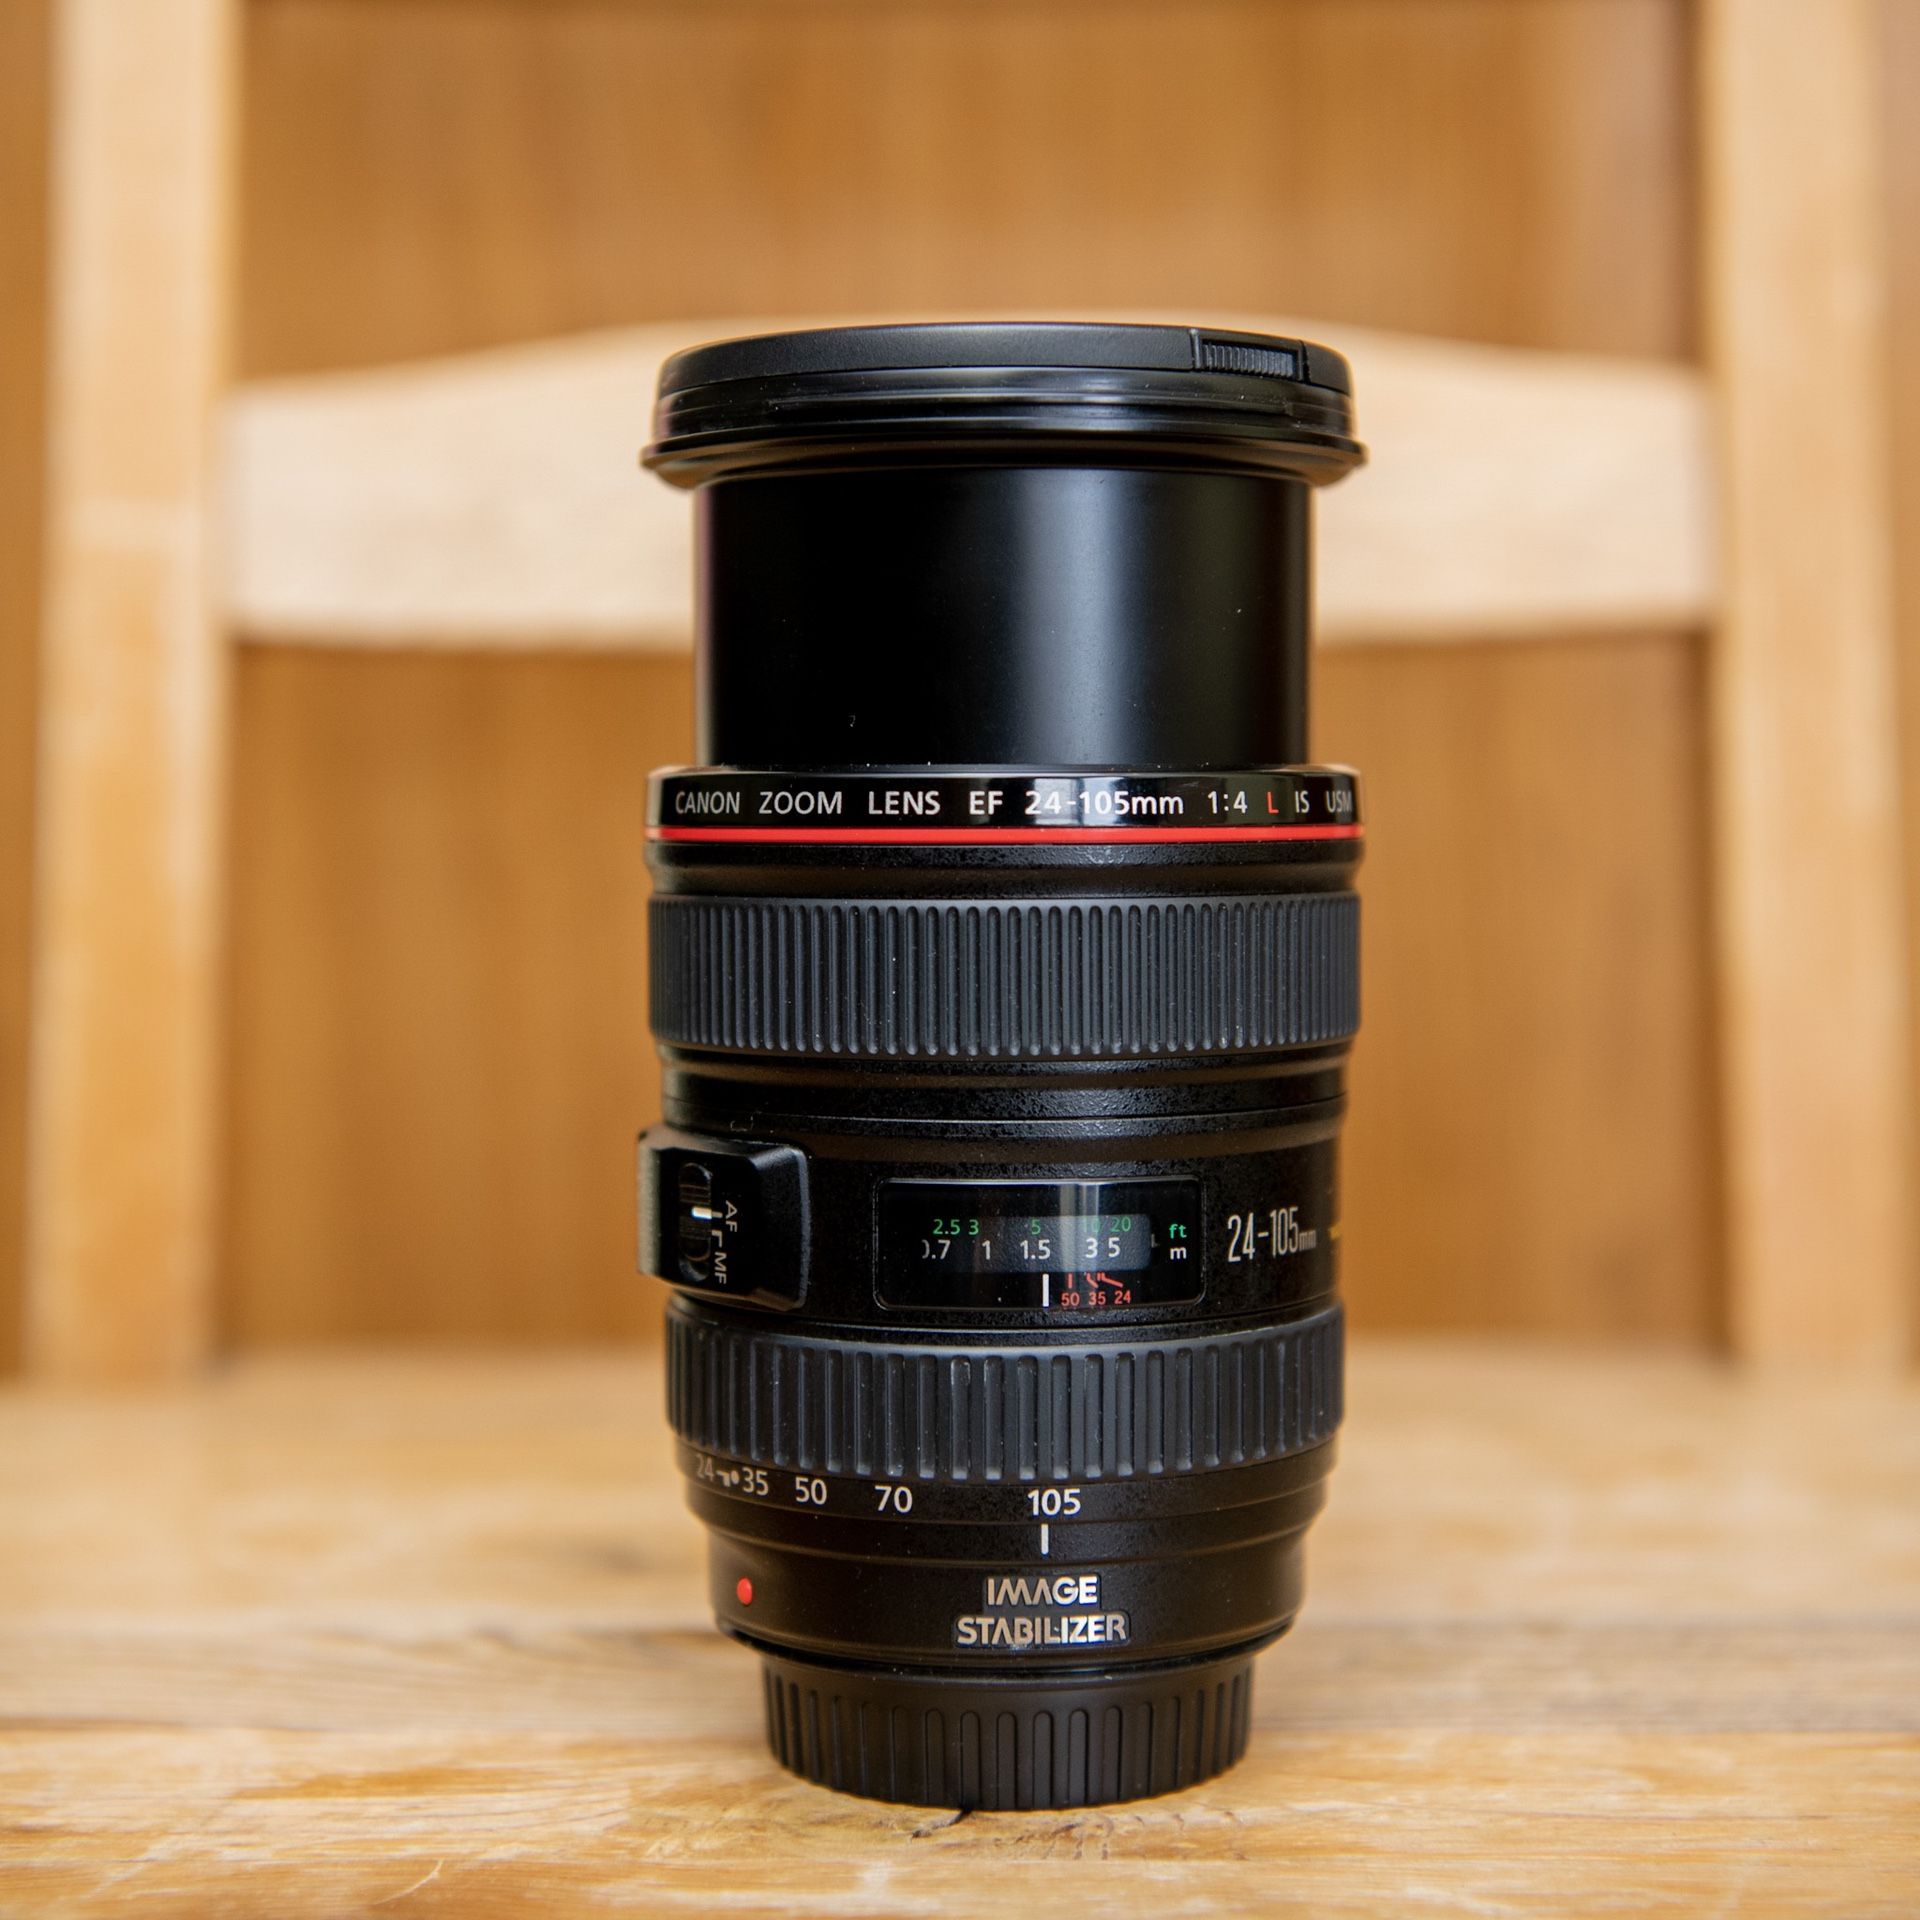 Canon 24-105mm f4 L IS USM lens